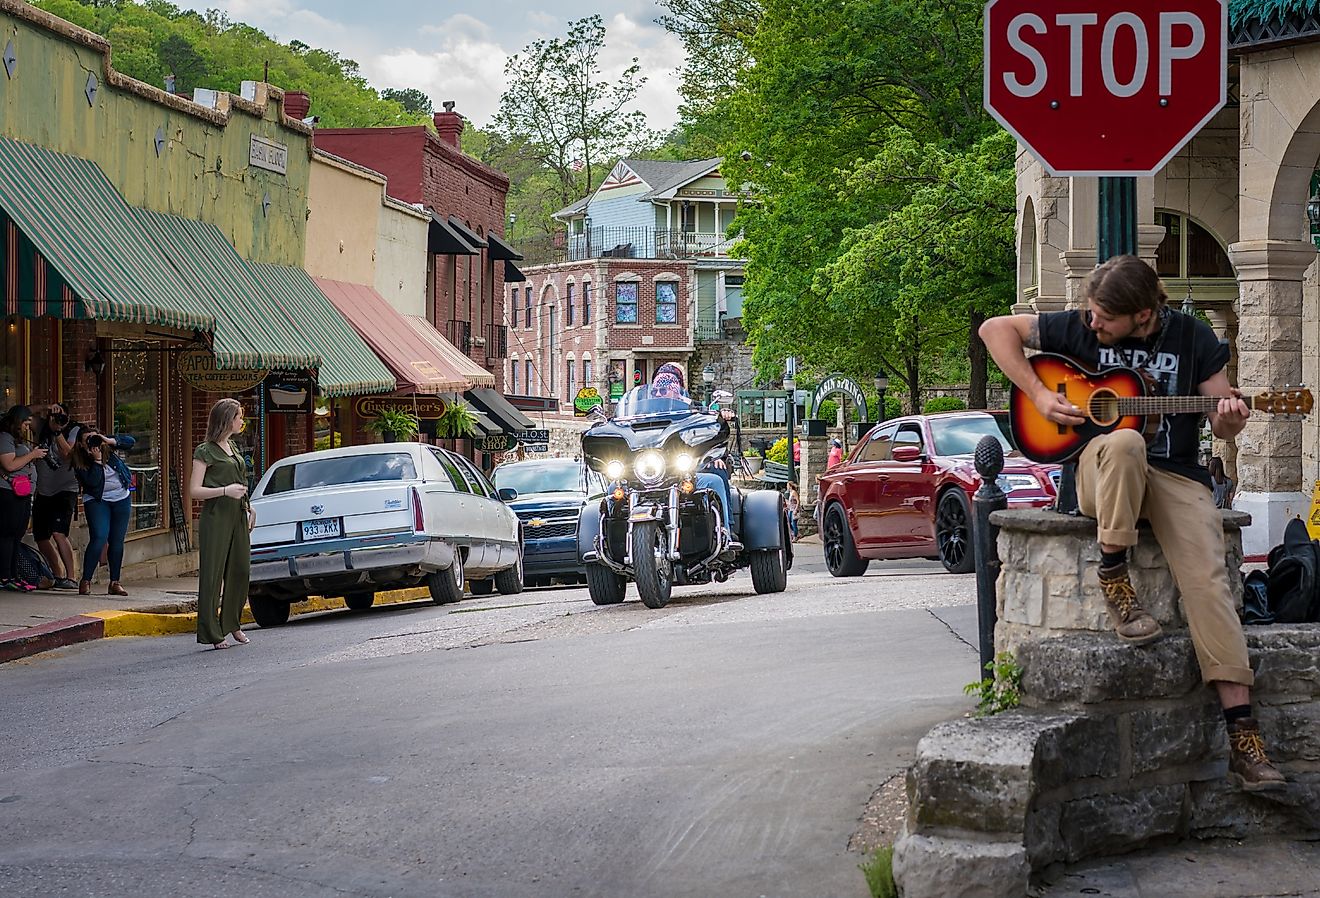 Biker visitors riding motorcycle downtown Eureka Springs, Man playing guitar at stop sign, freedom tourism on 2 wheels, vintage small american town. Image credit shuttersv via Shutterstock